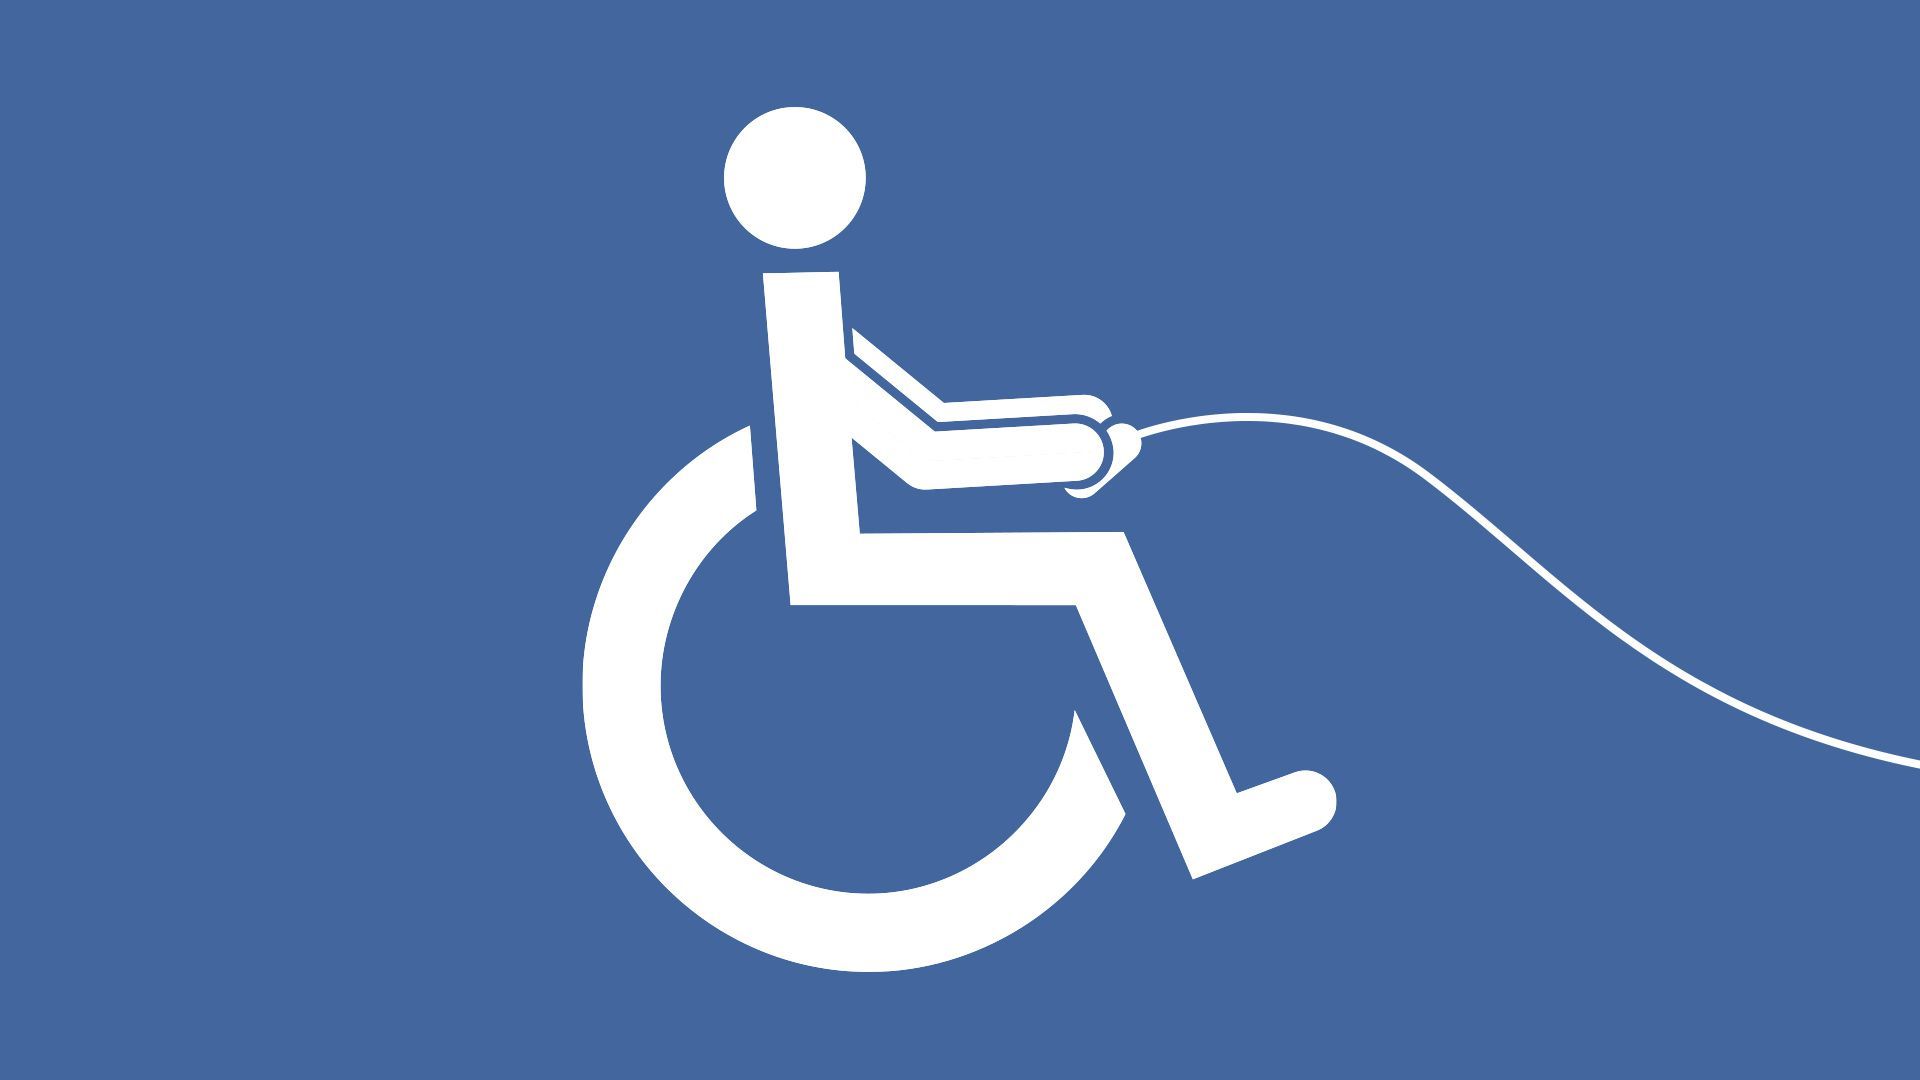 Illustration of the handicap icon with the stick figure holding a gaming controller.  